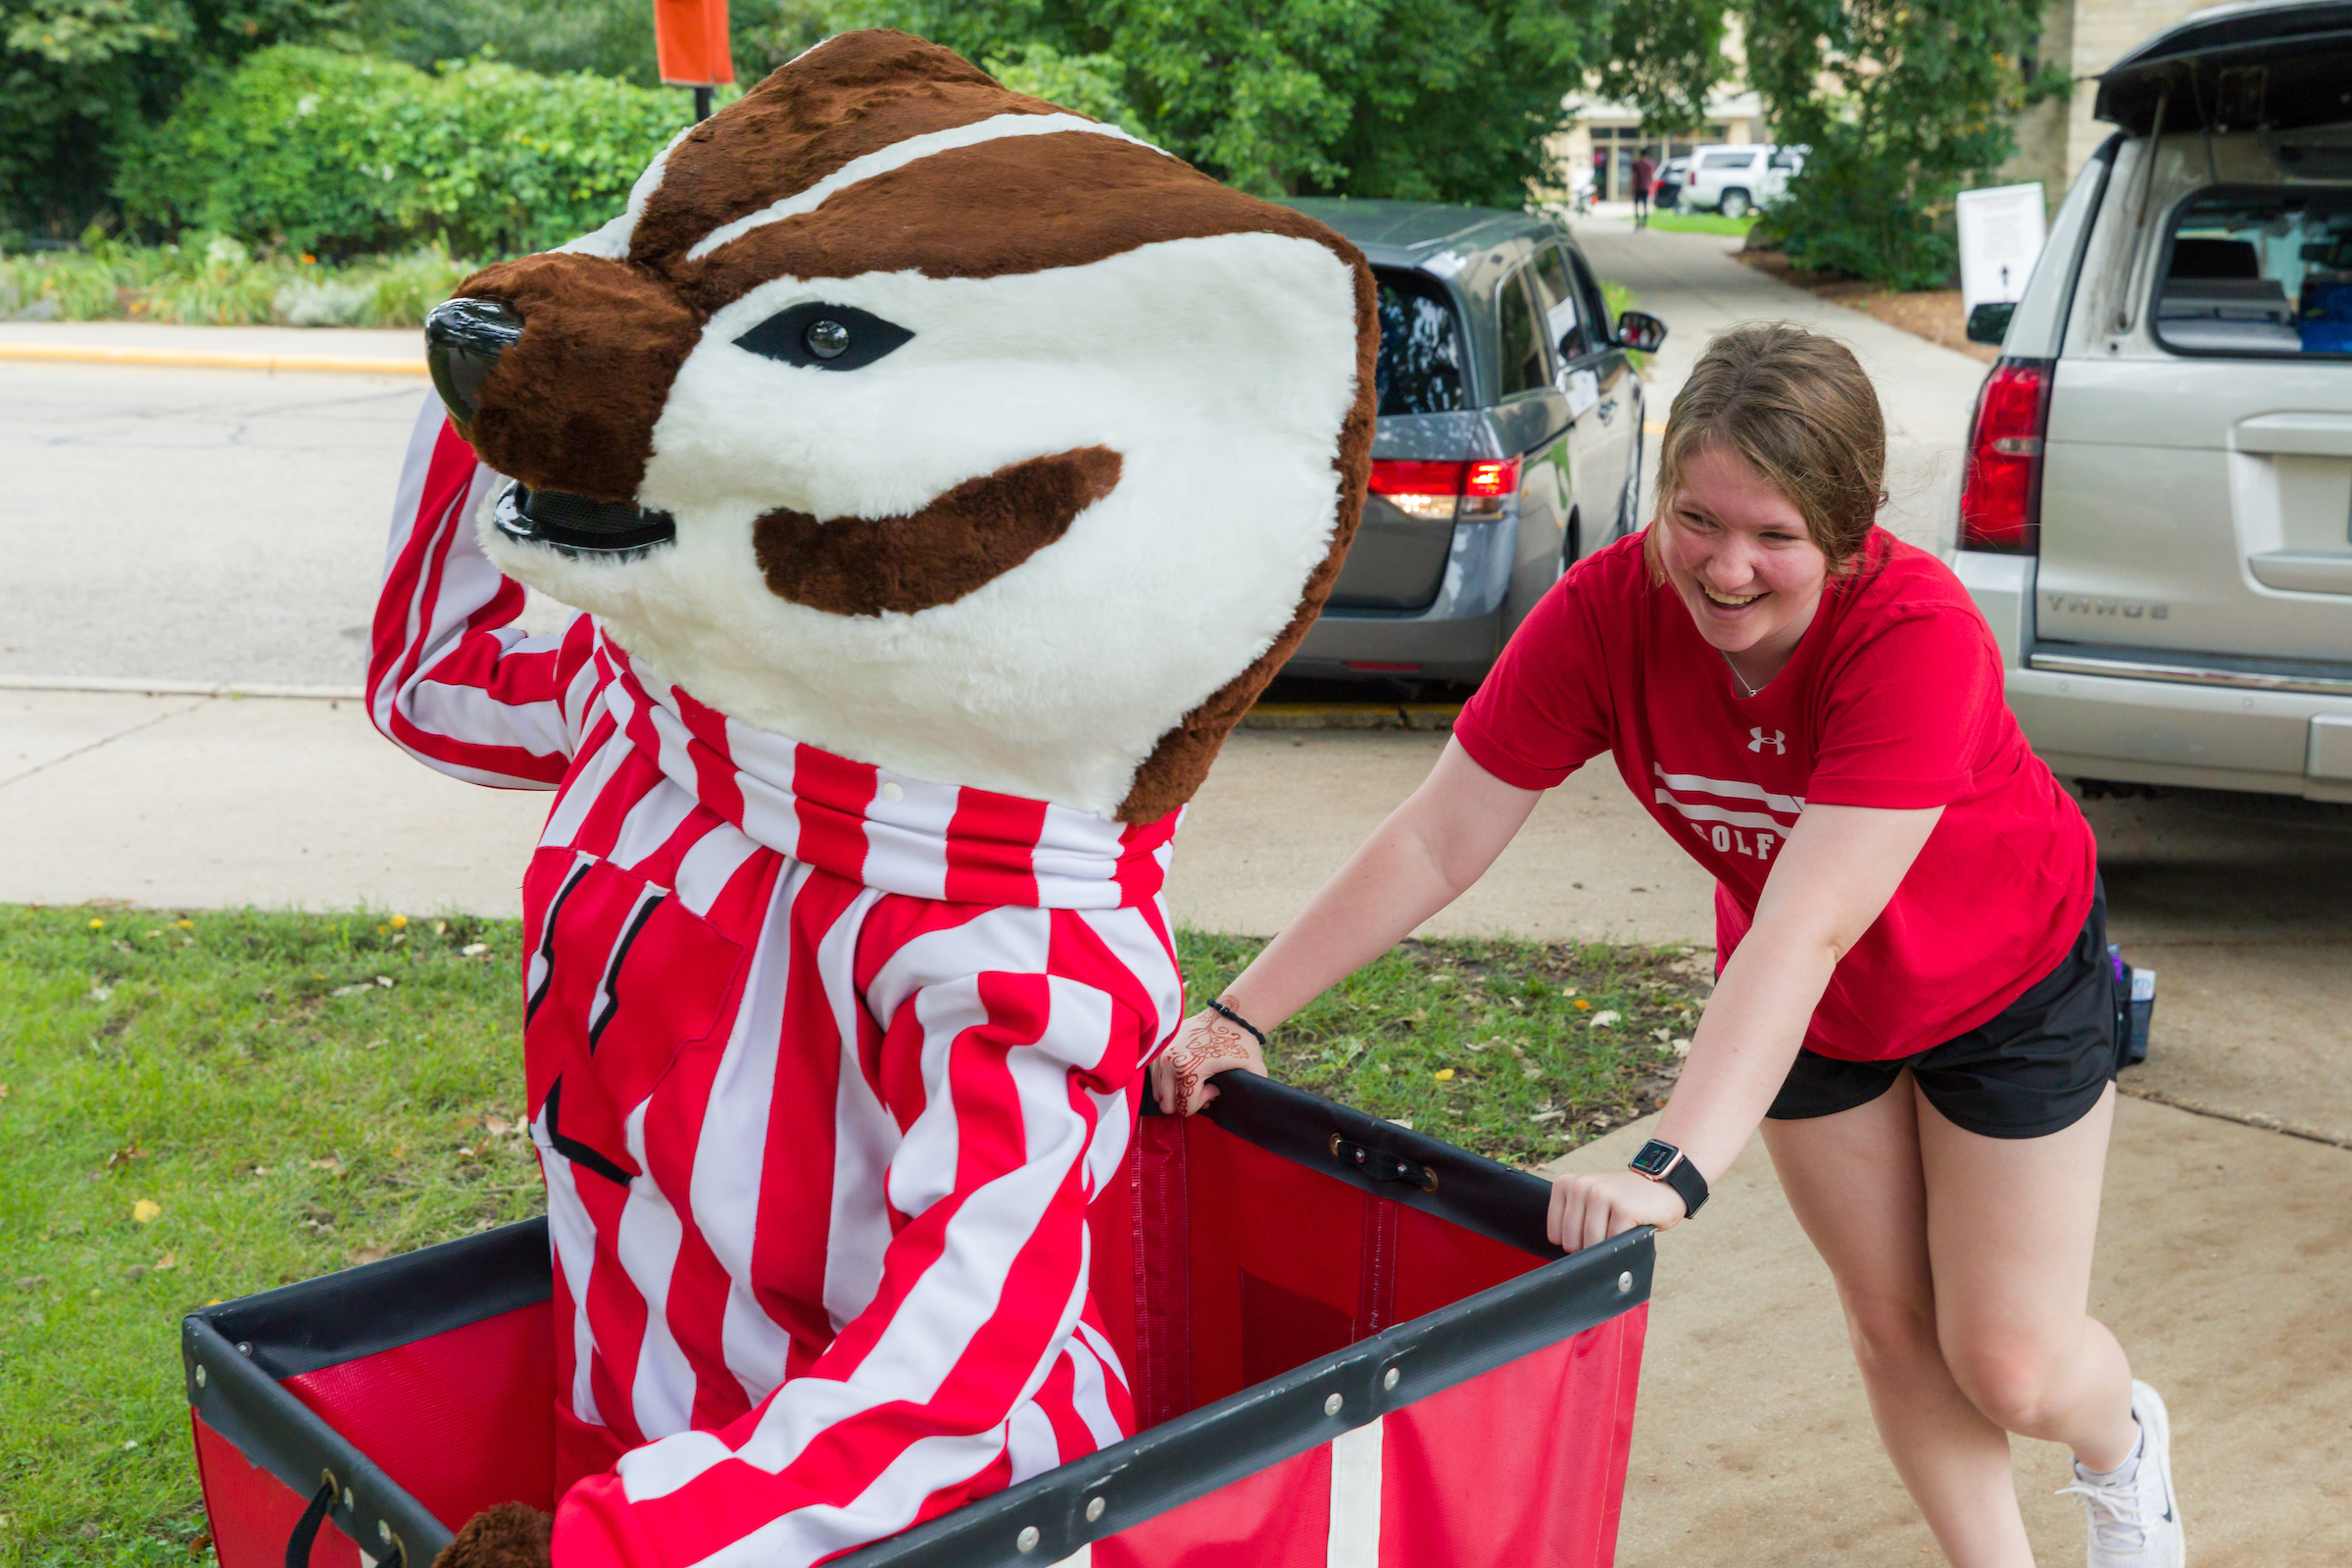 A student pushes Bucky Badger around in a red cart